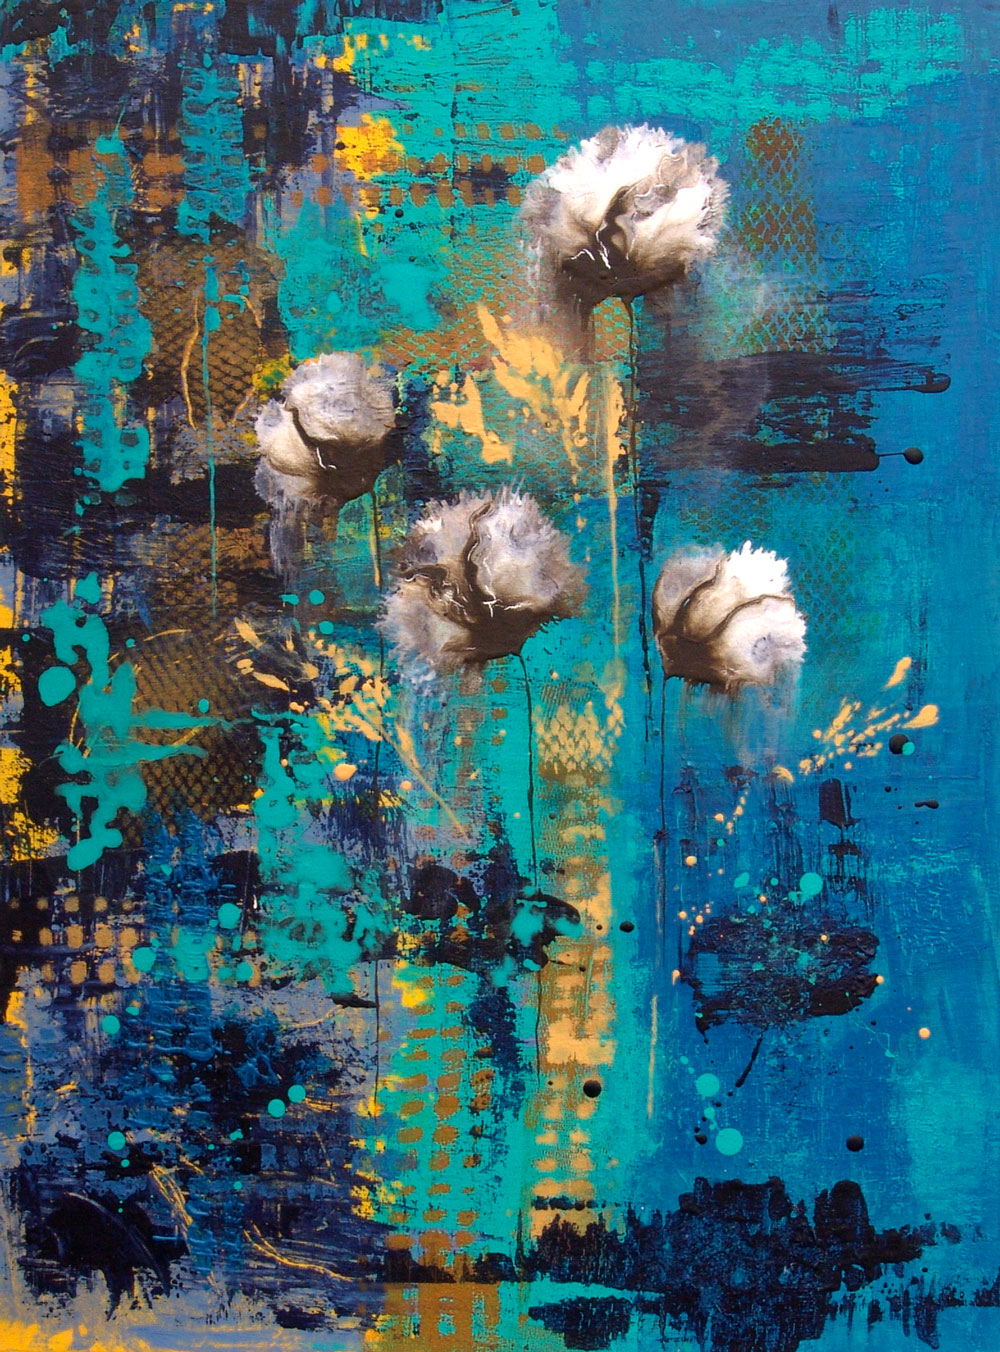 Blue Rain Abstract Painting -Decor Canvas Wall Art Flower Water Large Teal Blue Yellow Contemporary